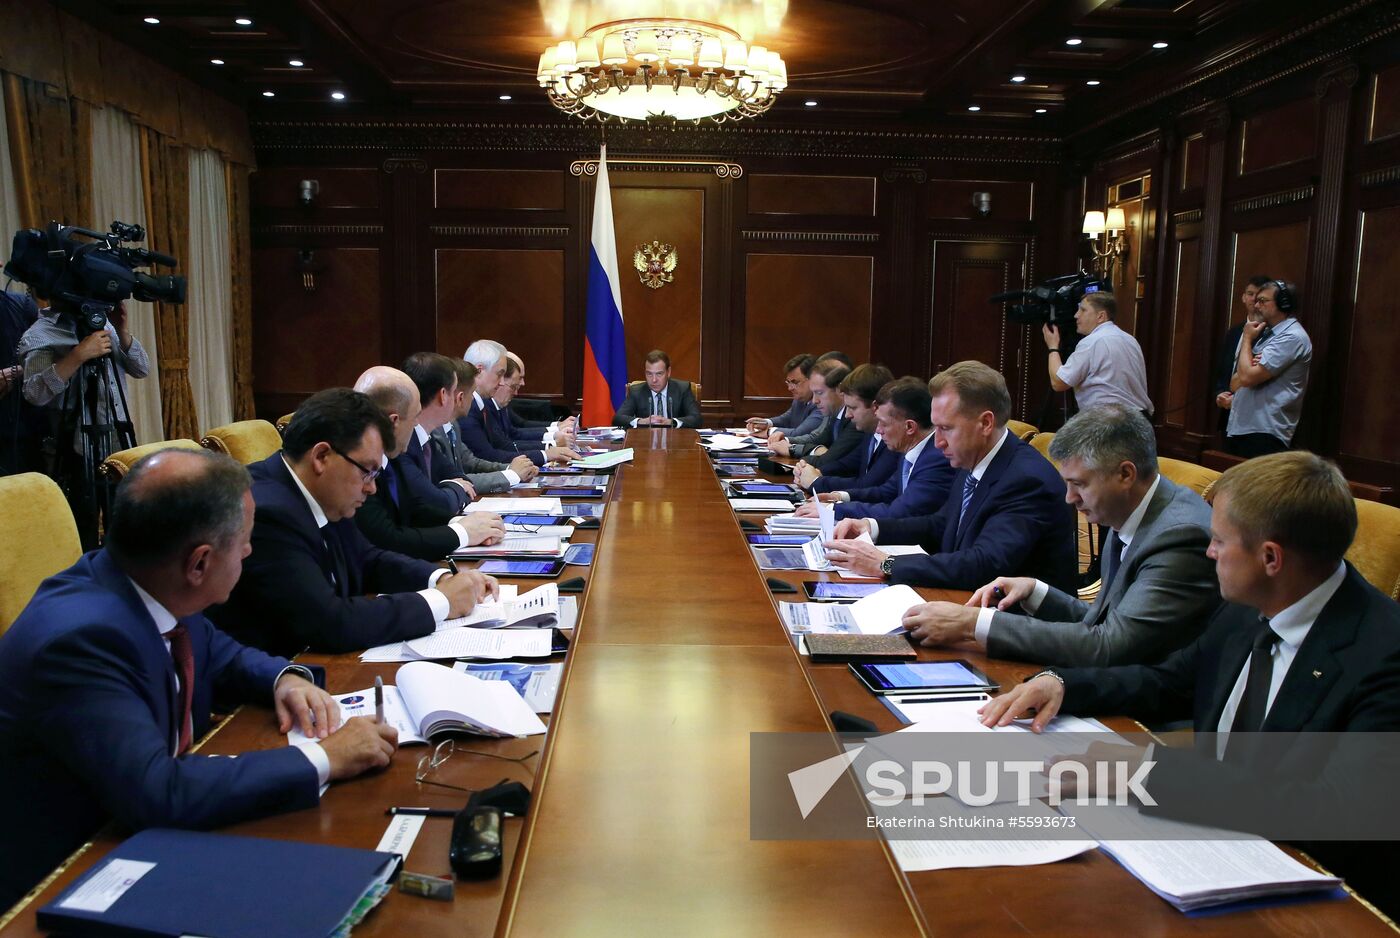 Prime Minister Medvedev chairs meeting of Presidium of Council for Strategic Development